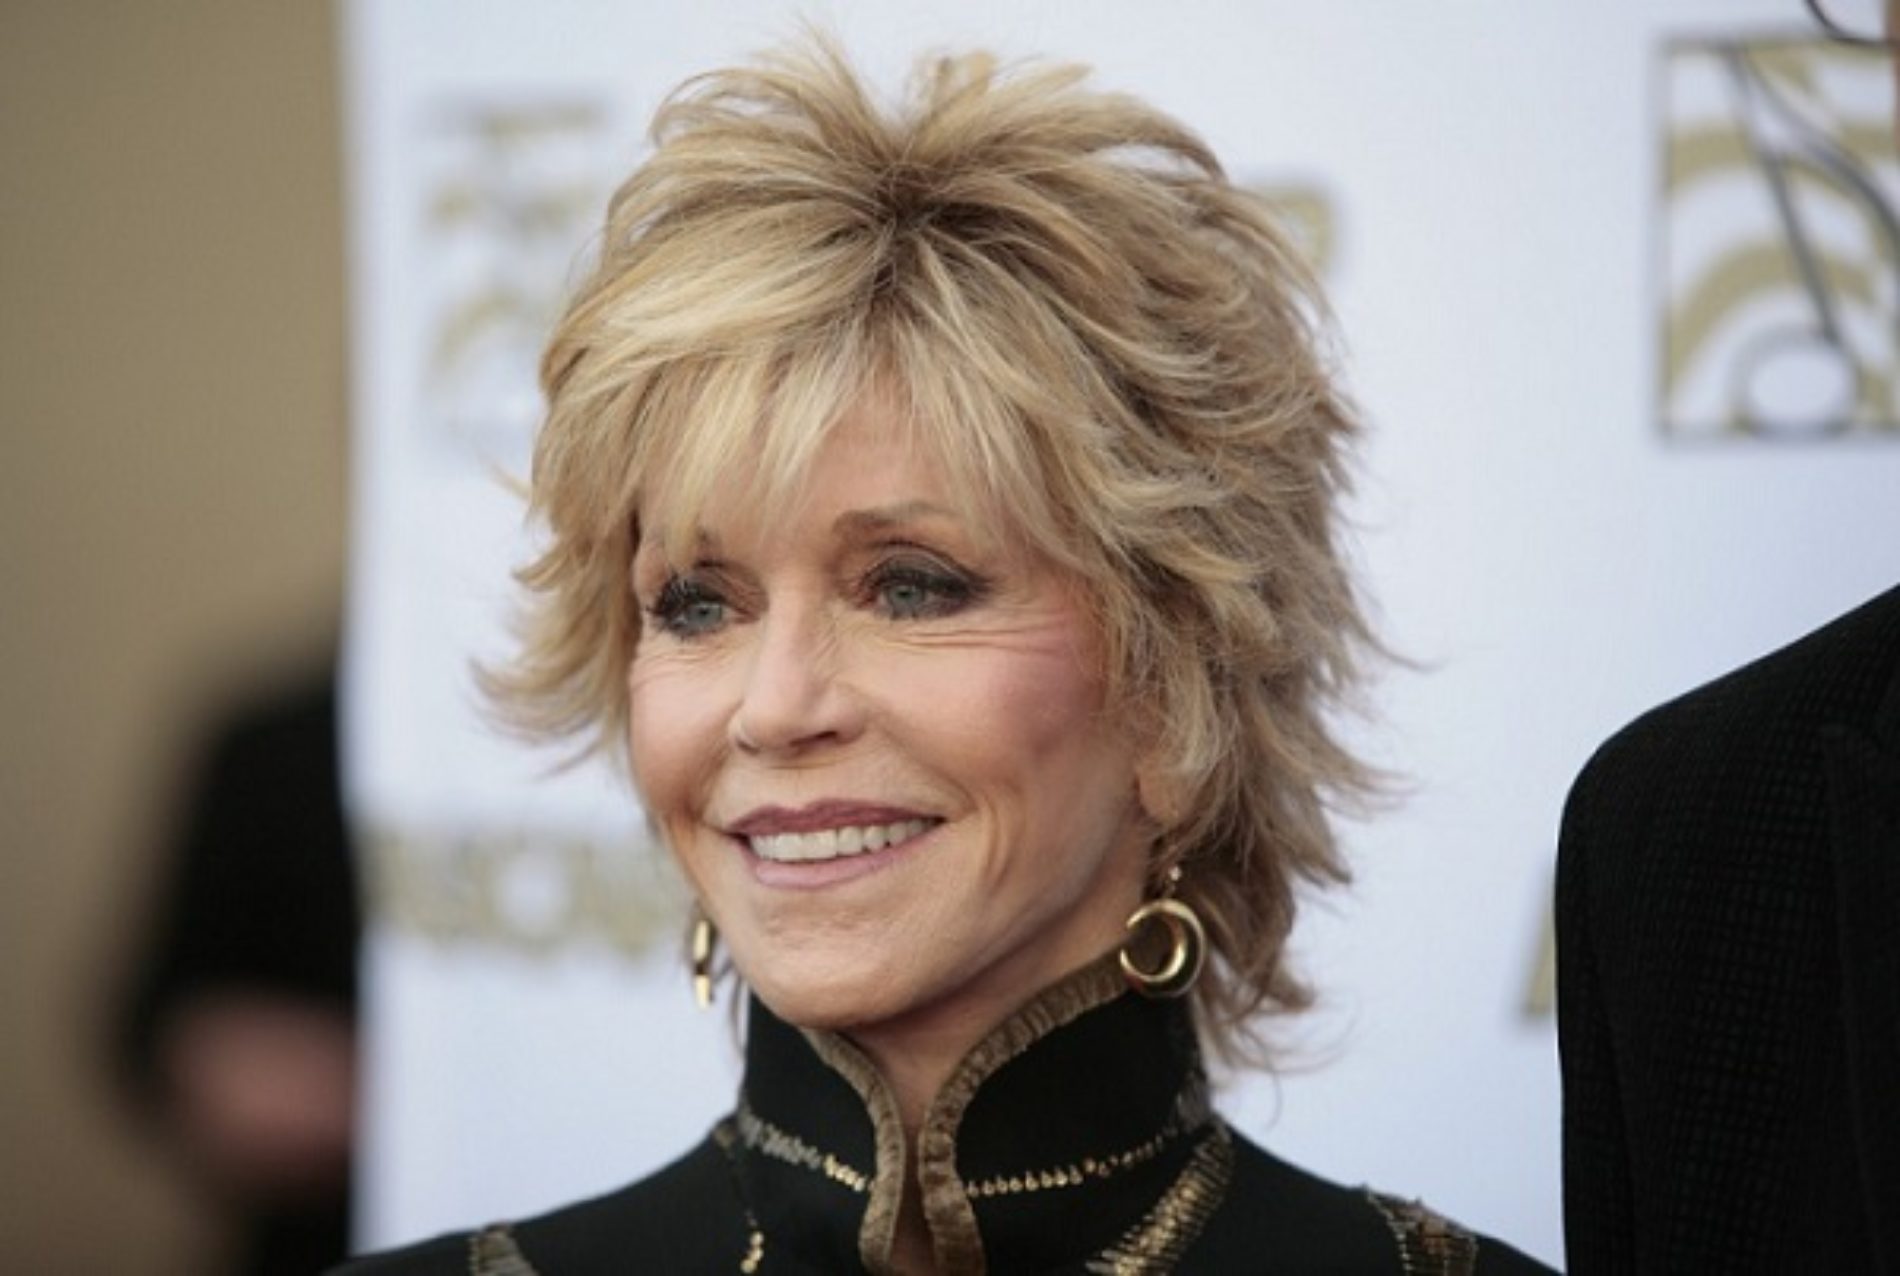 ‘I nearly married a famous gay actor before he came out.’ – Jane Fonda